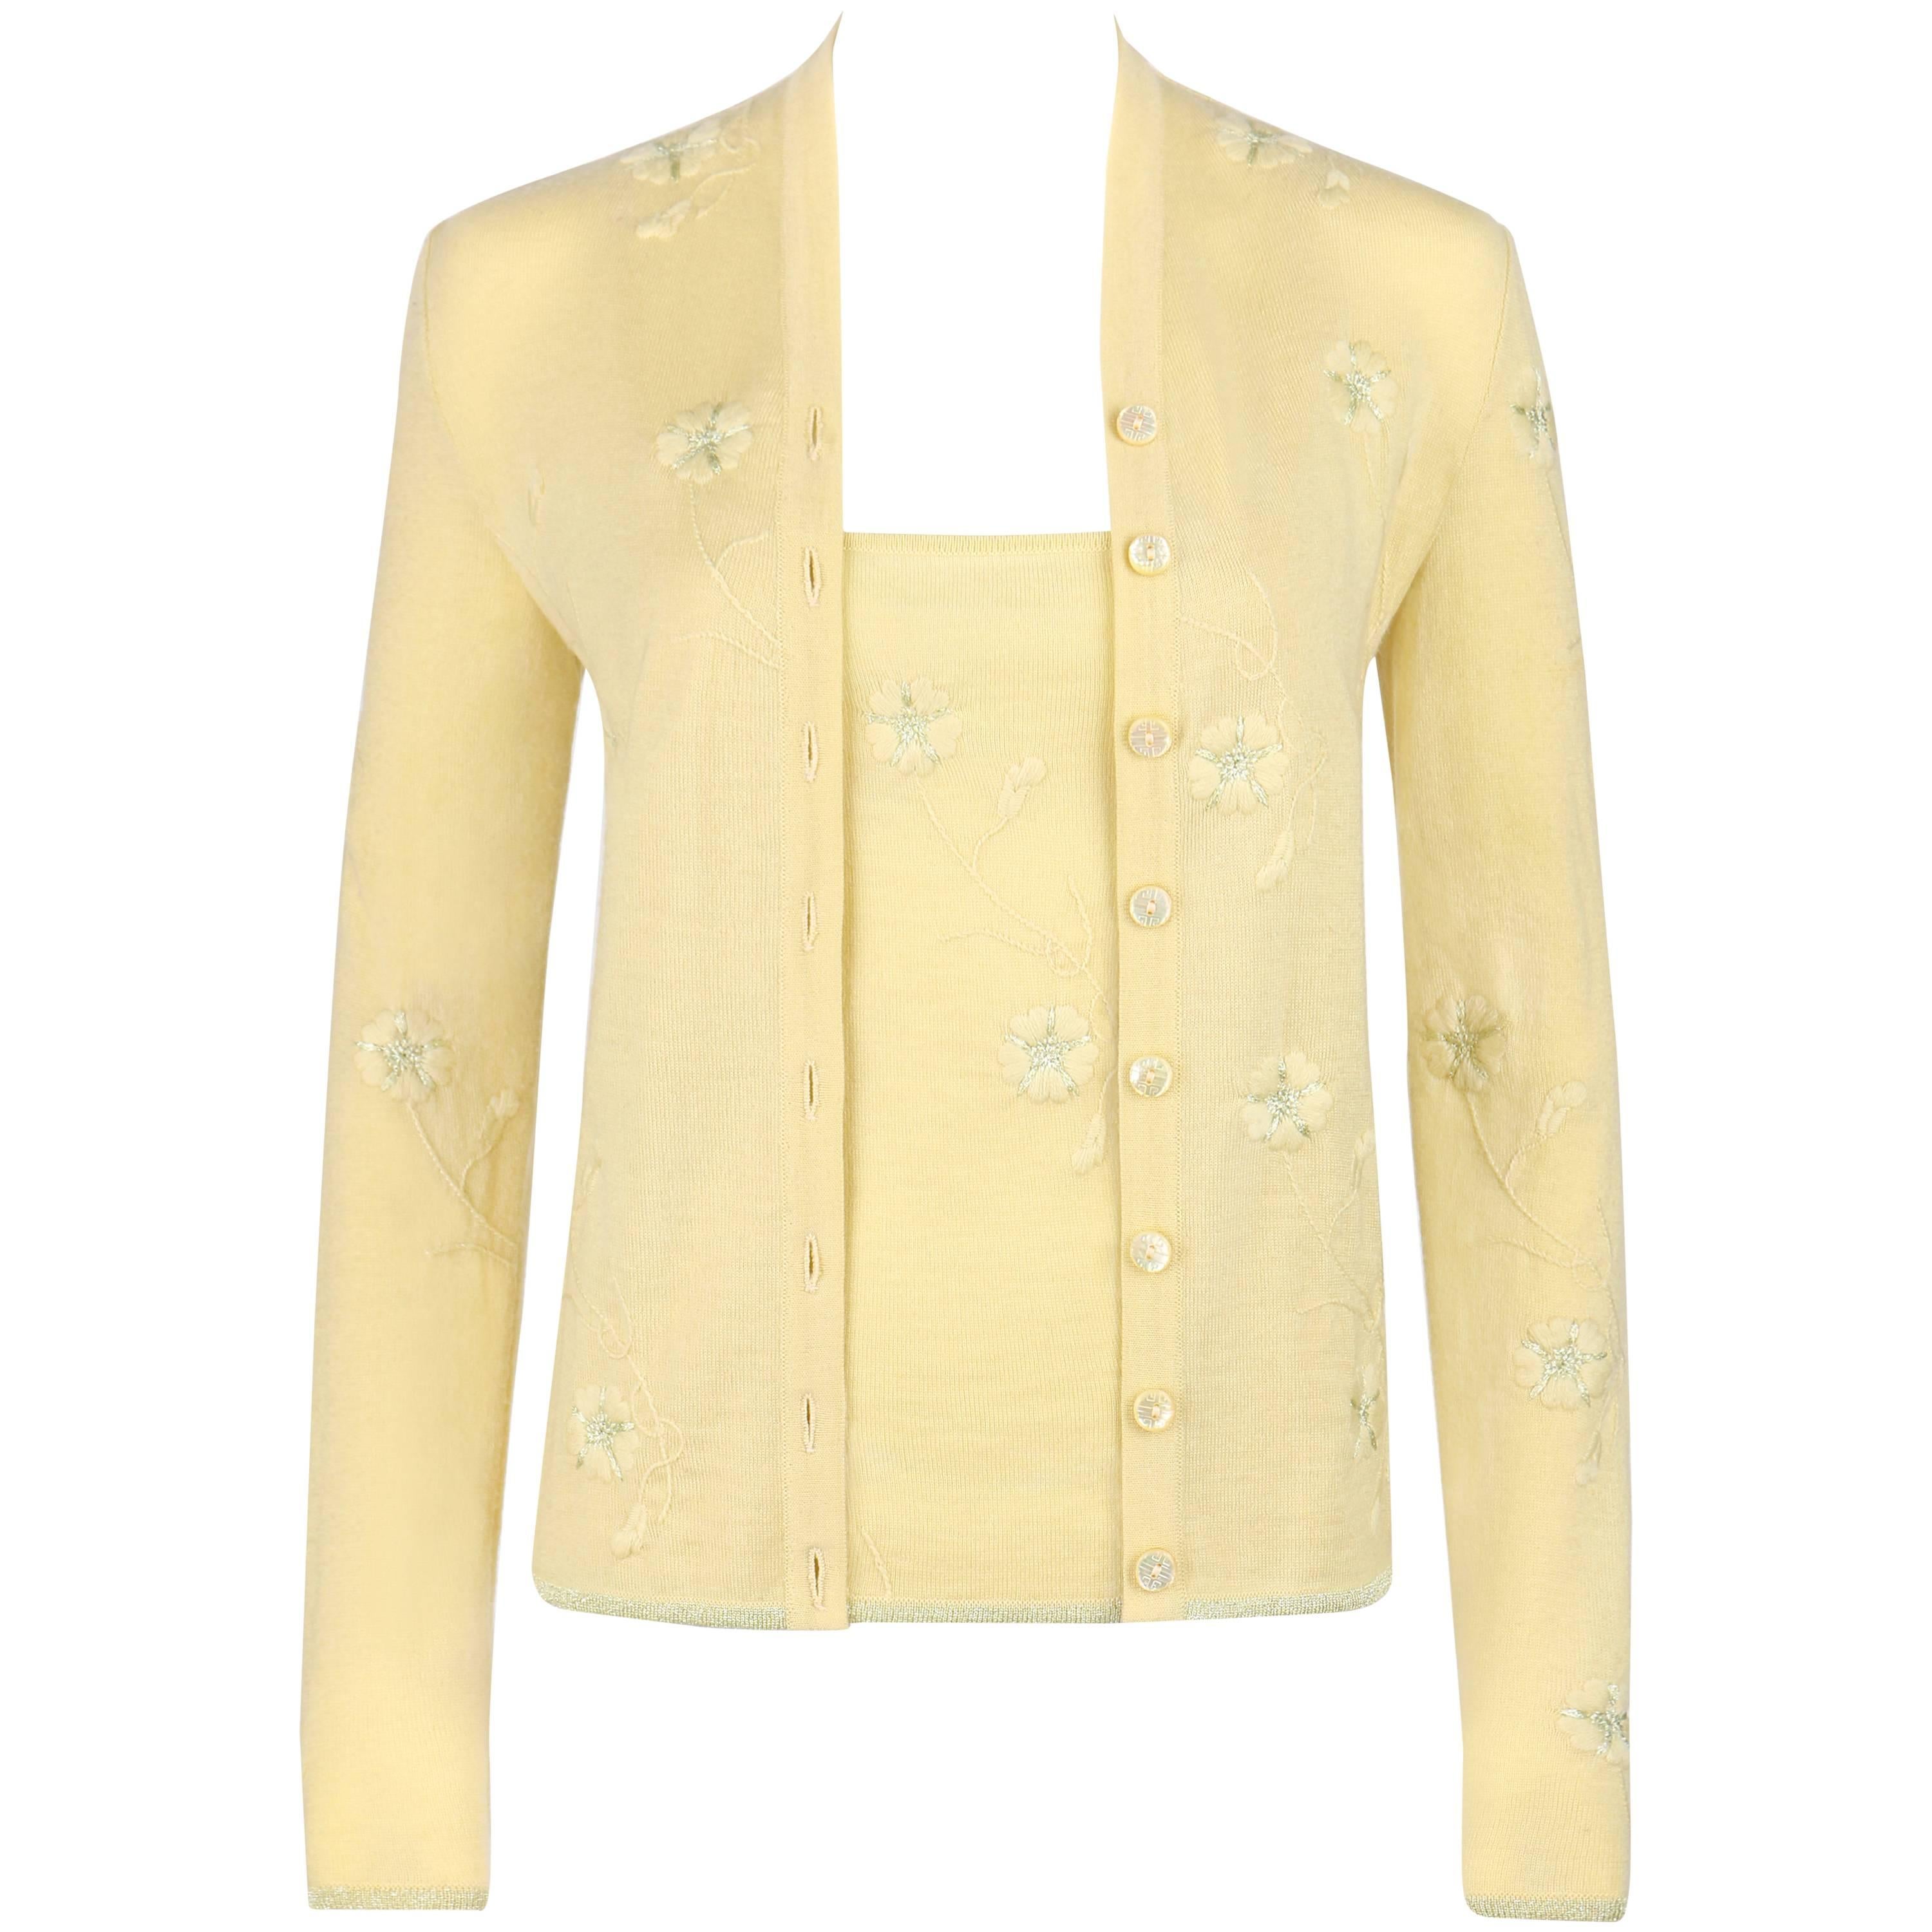 GIVENCHY Couture S/S 1998 ALEXANDER MCQUEEN Pale Yellow Floral Cardigan Top Set For Sale